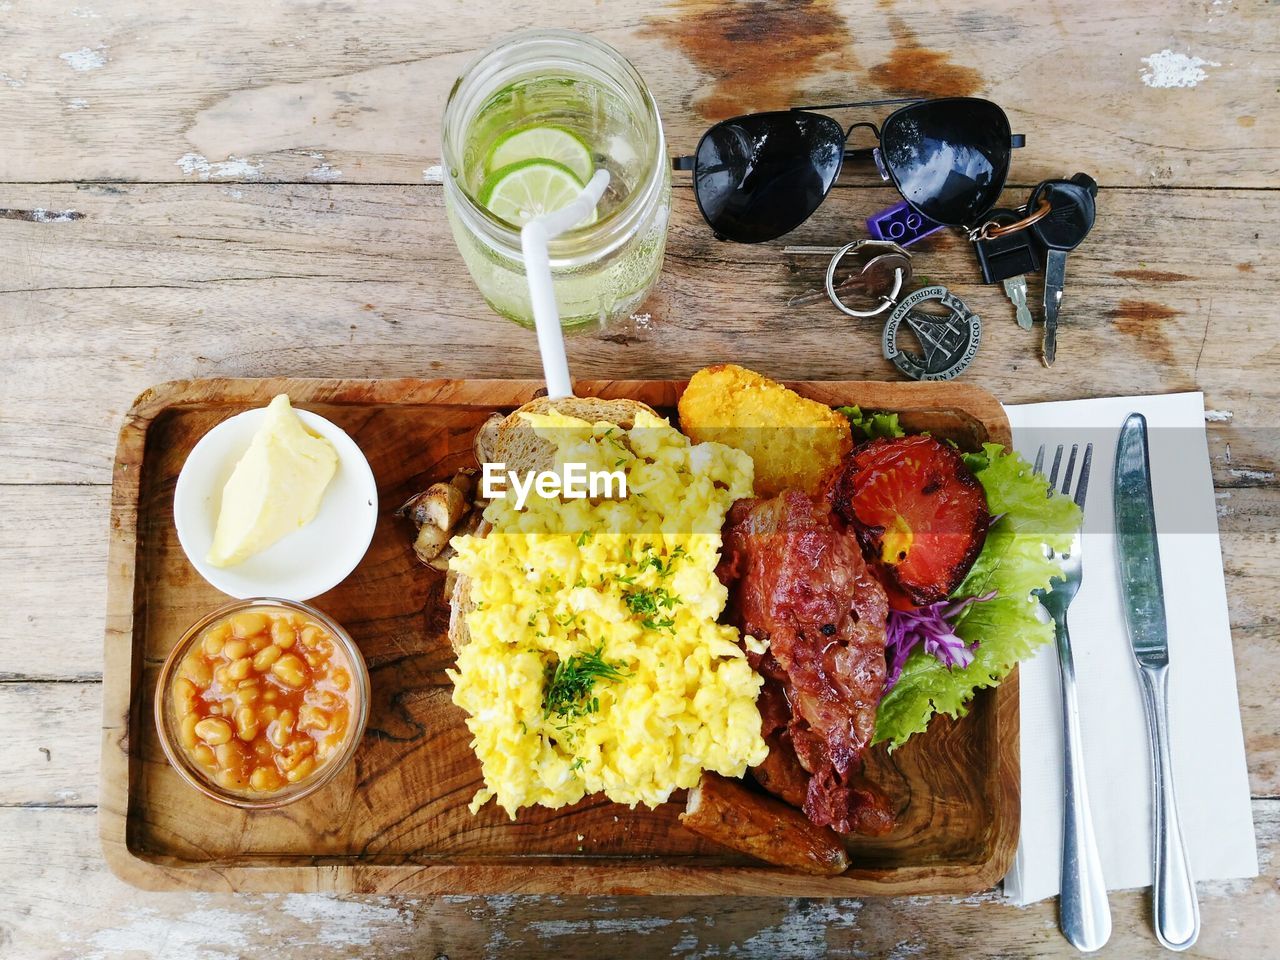 High angle view of meal with sunglasses and keys on table in restaurant